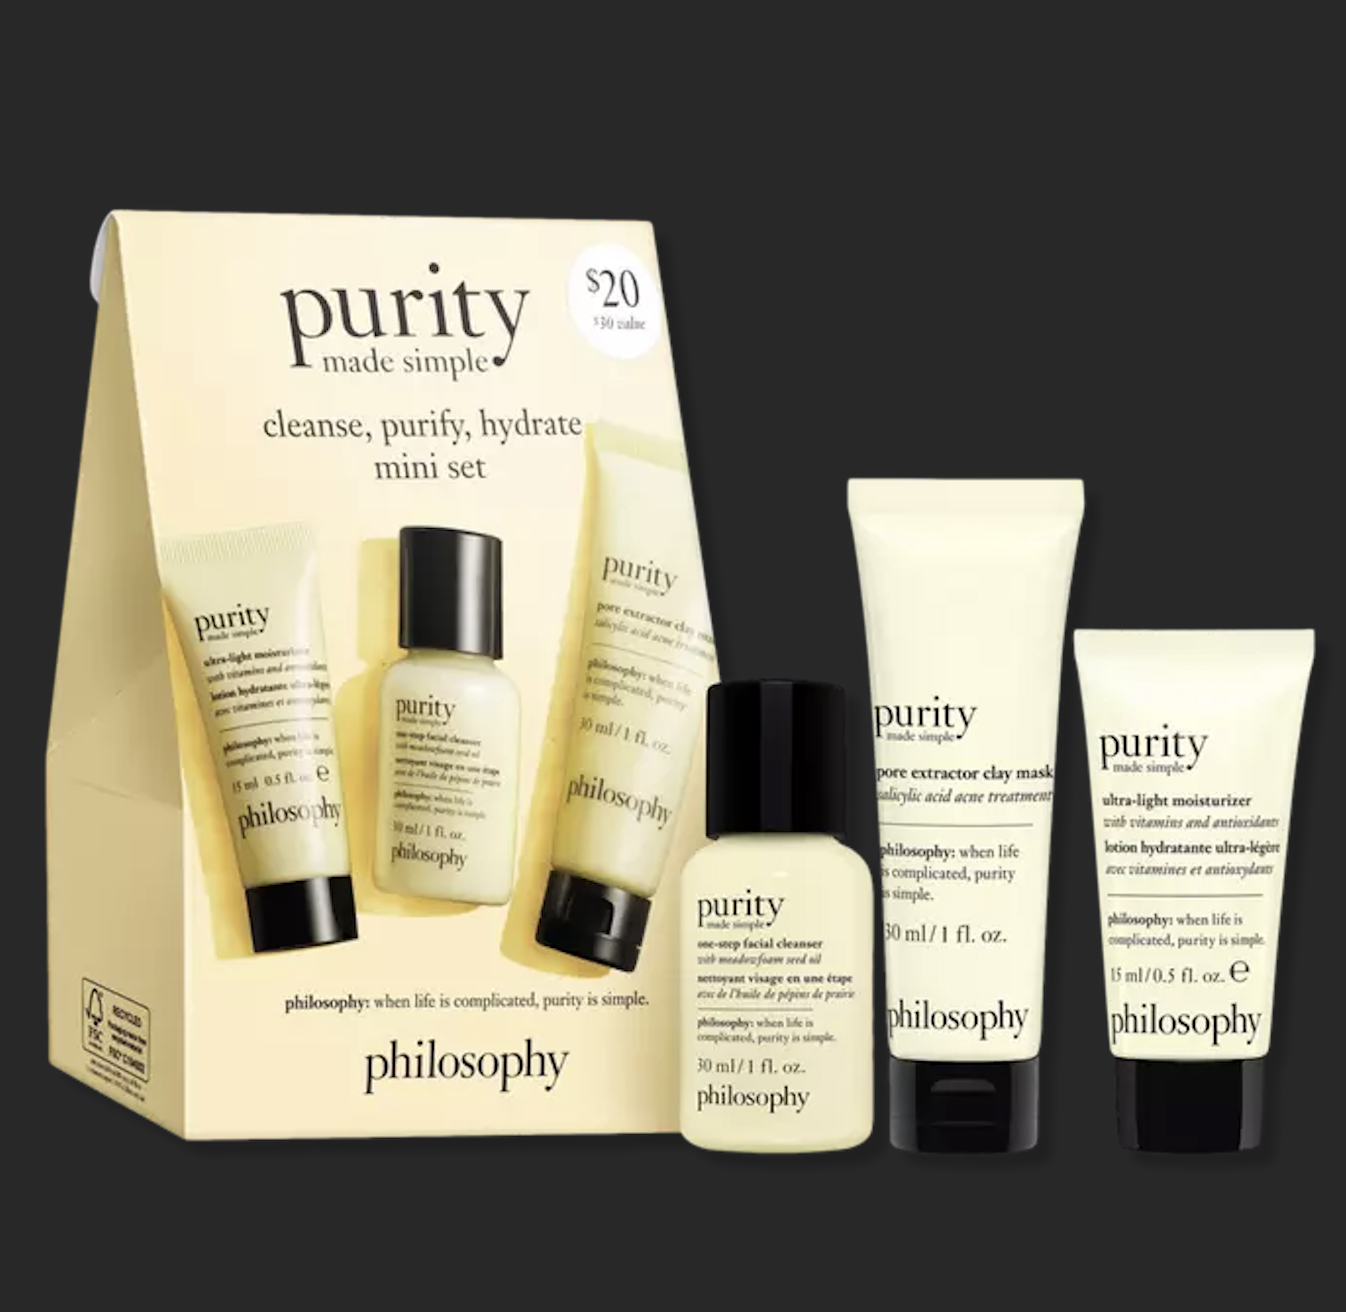 philosophy purity made simple cleanse, purify, hydrate mini set